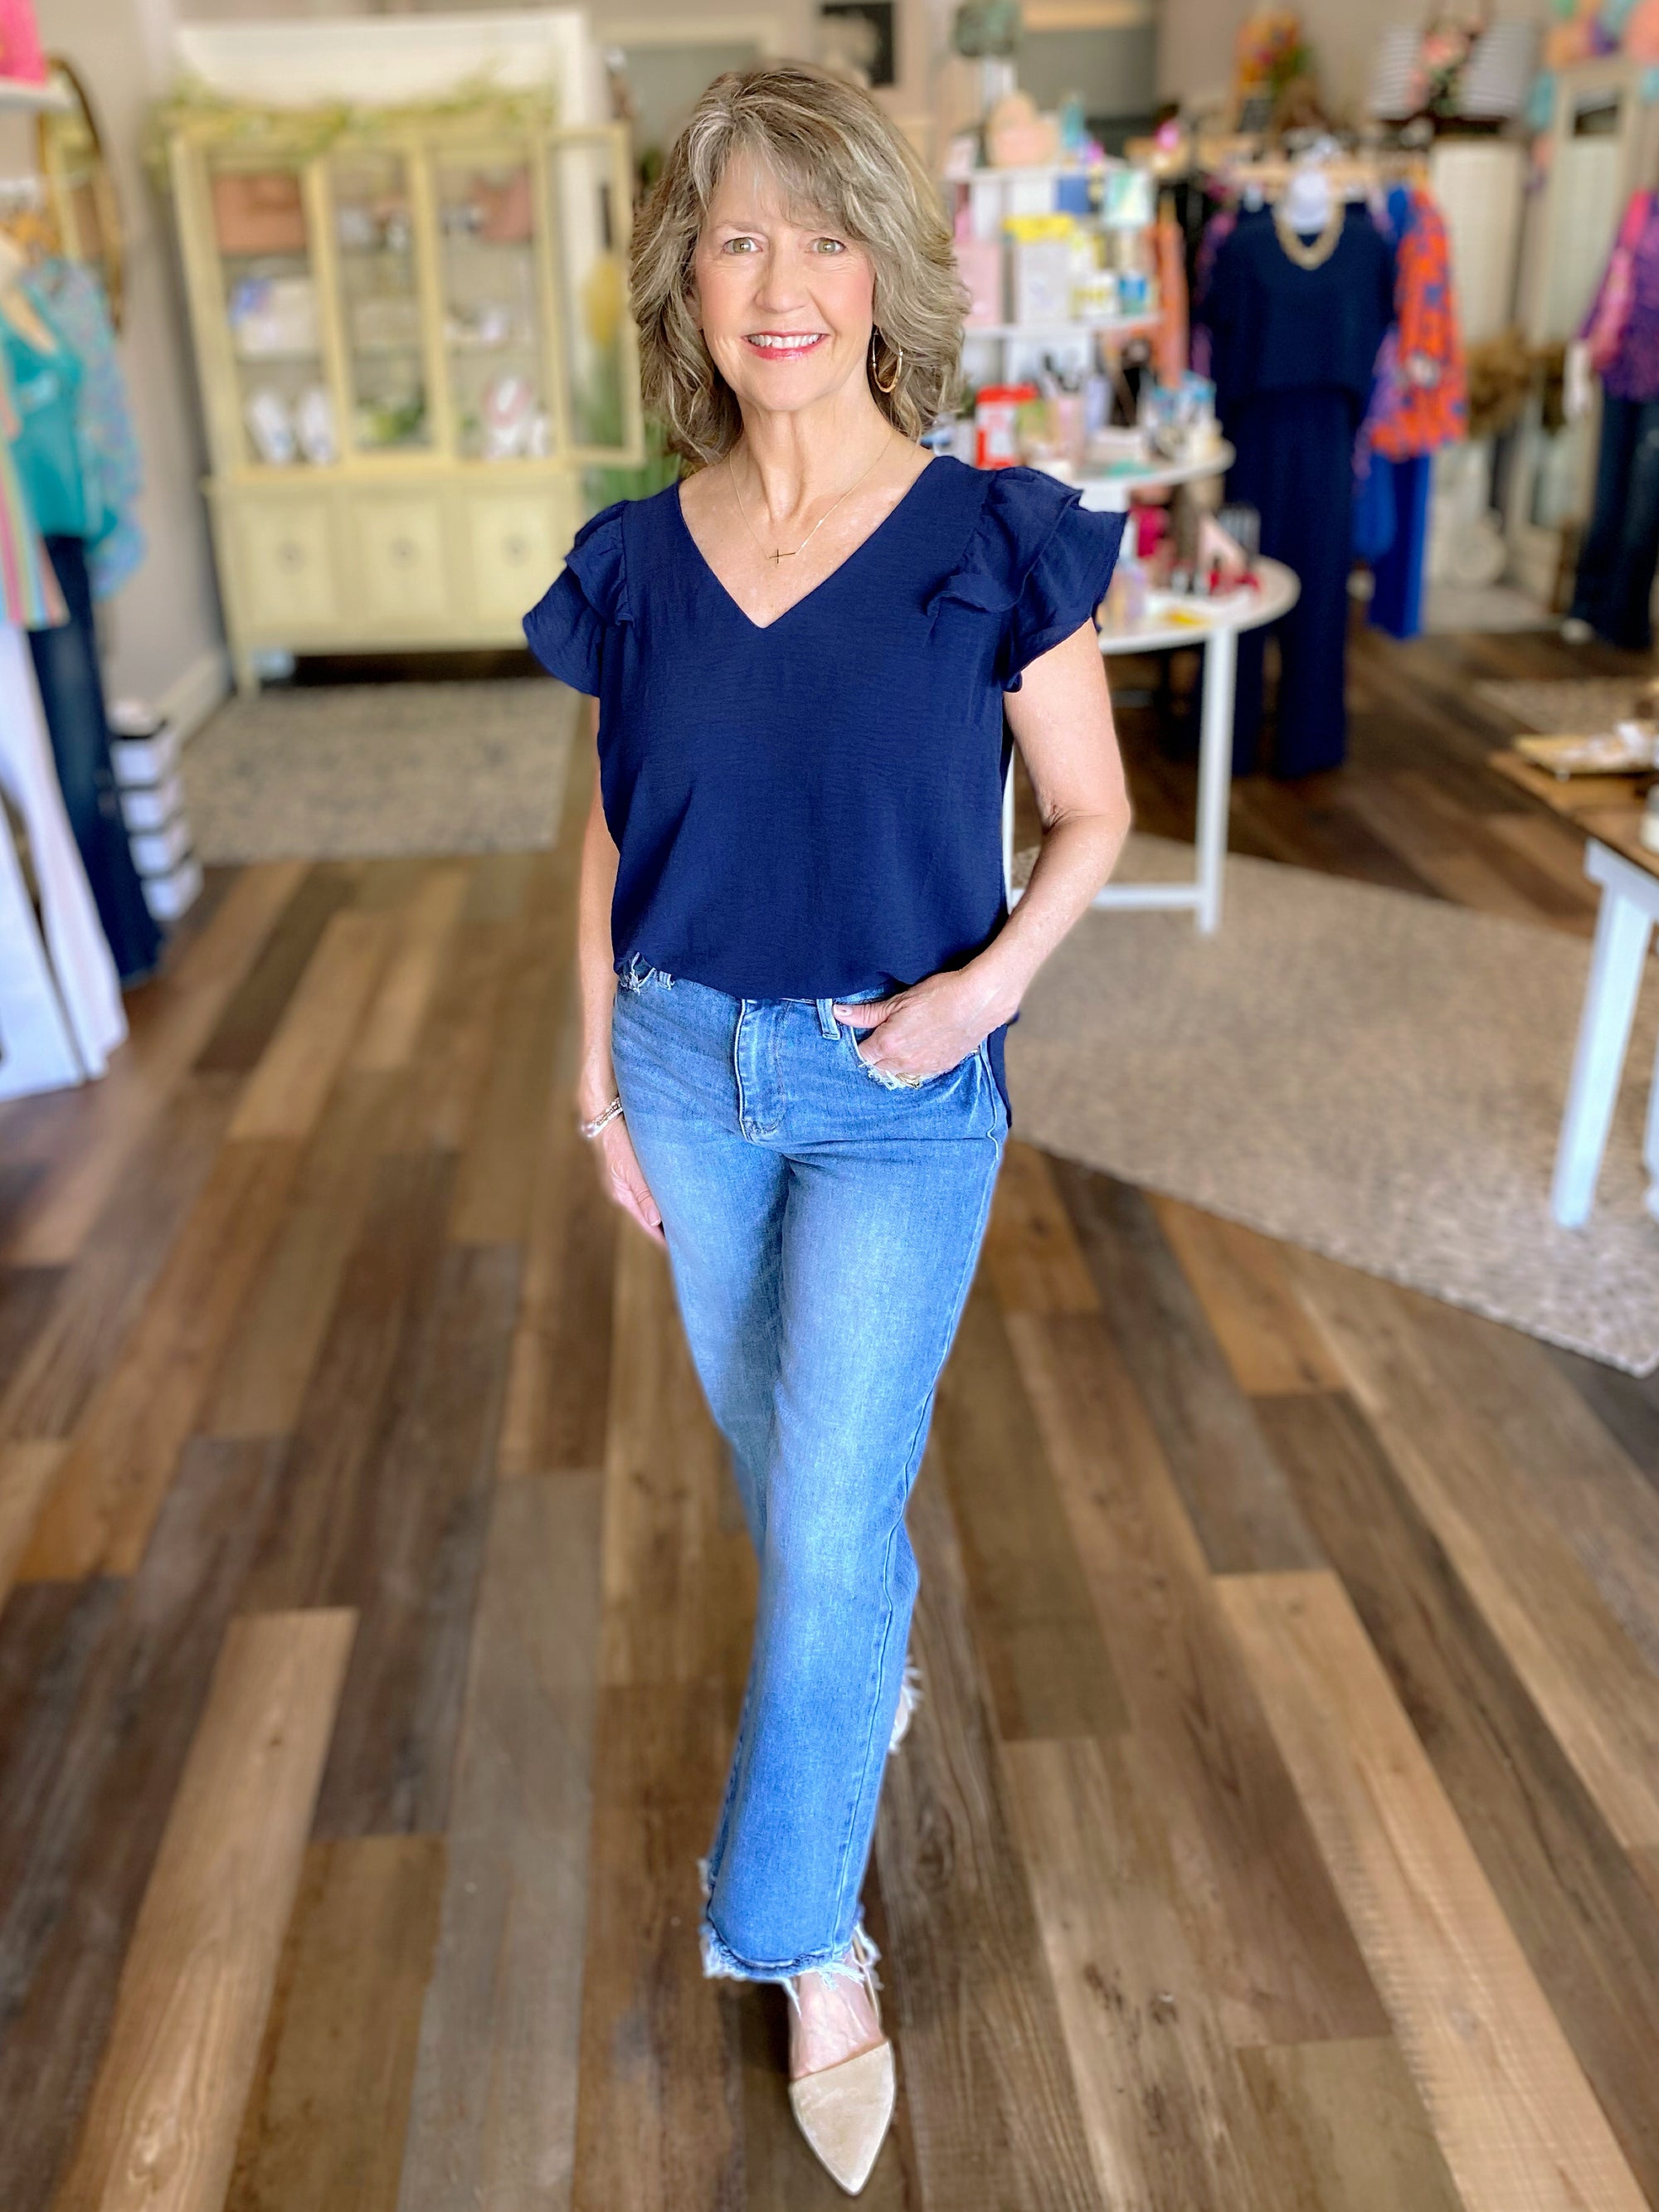 The Do's and Don'ts of Wearing Leggings - Angie's Strength & Style Boutique